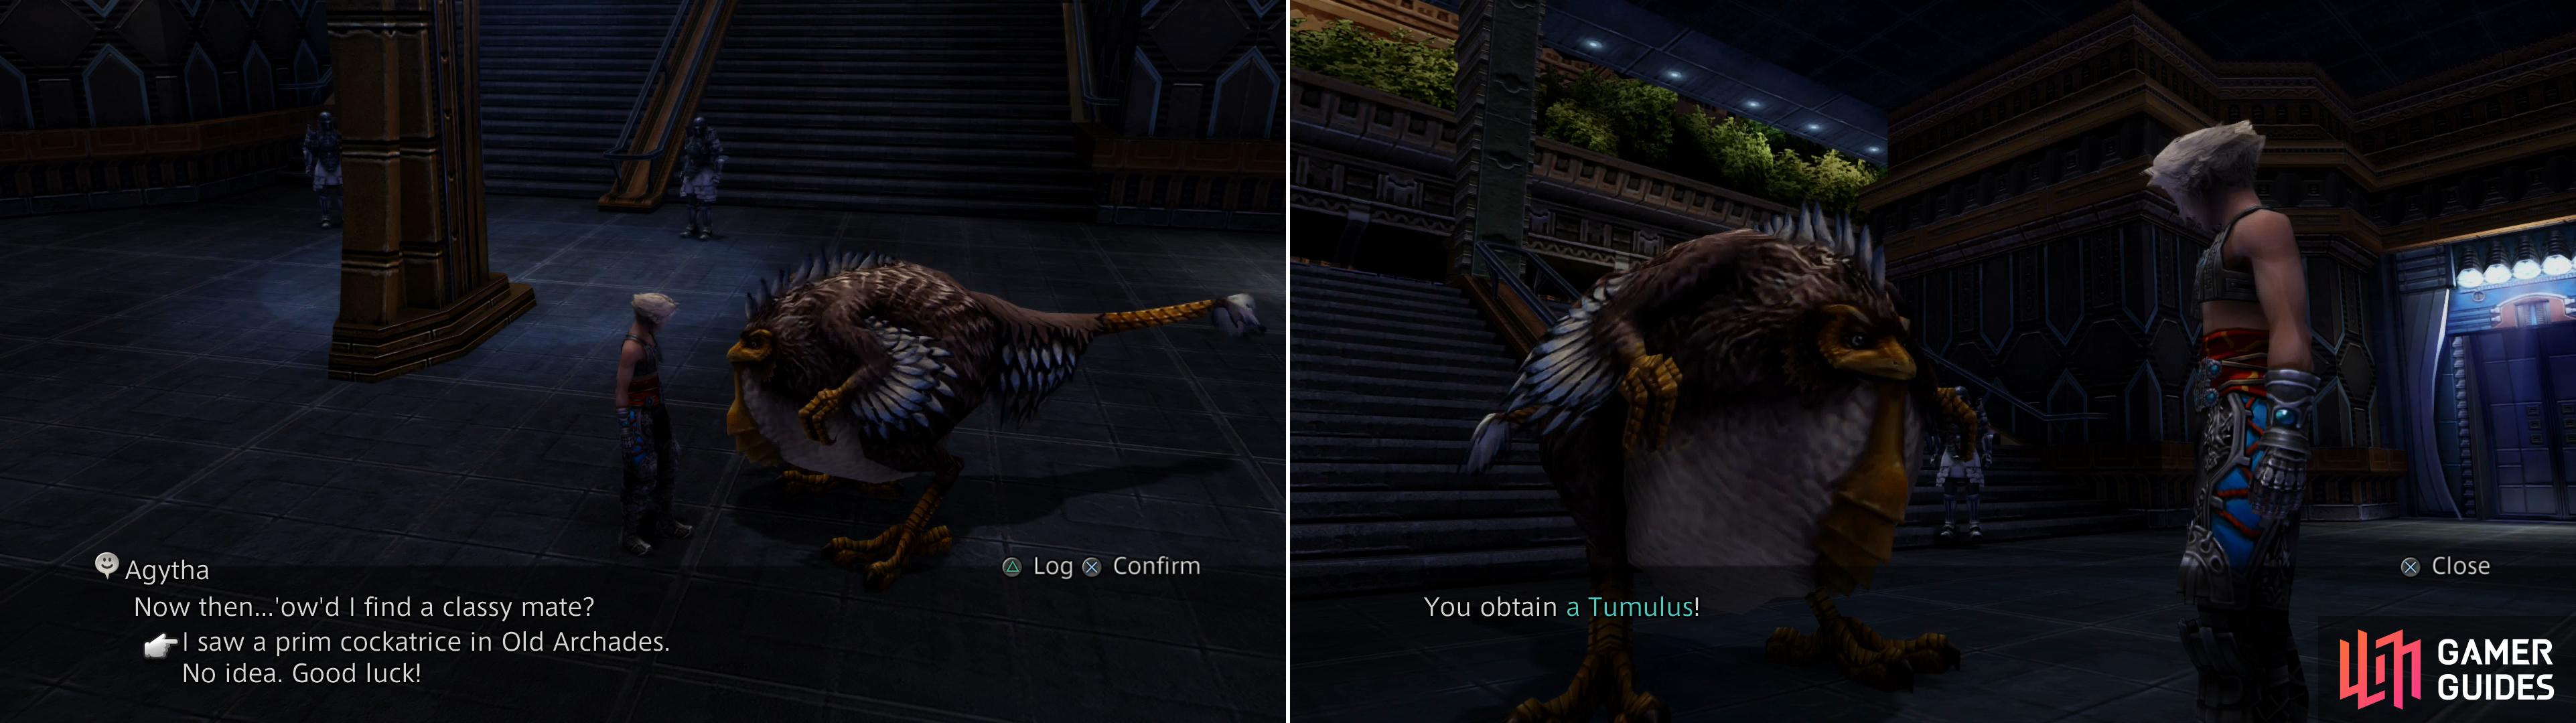 Chase down Agytha in the Grand Arcade and tell her about the Cockatrice you found in Old Archades (left) and she'll give you a Tumulus (right).